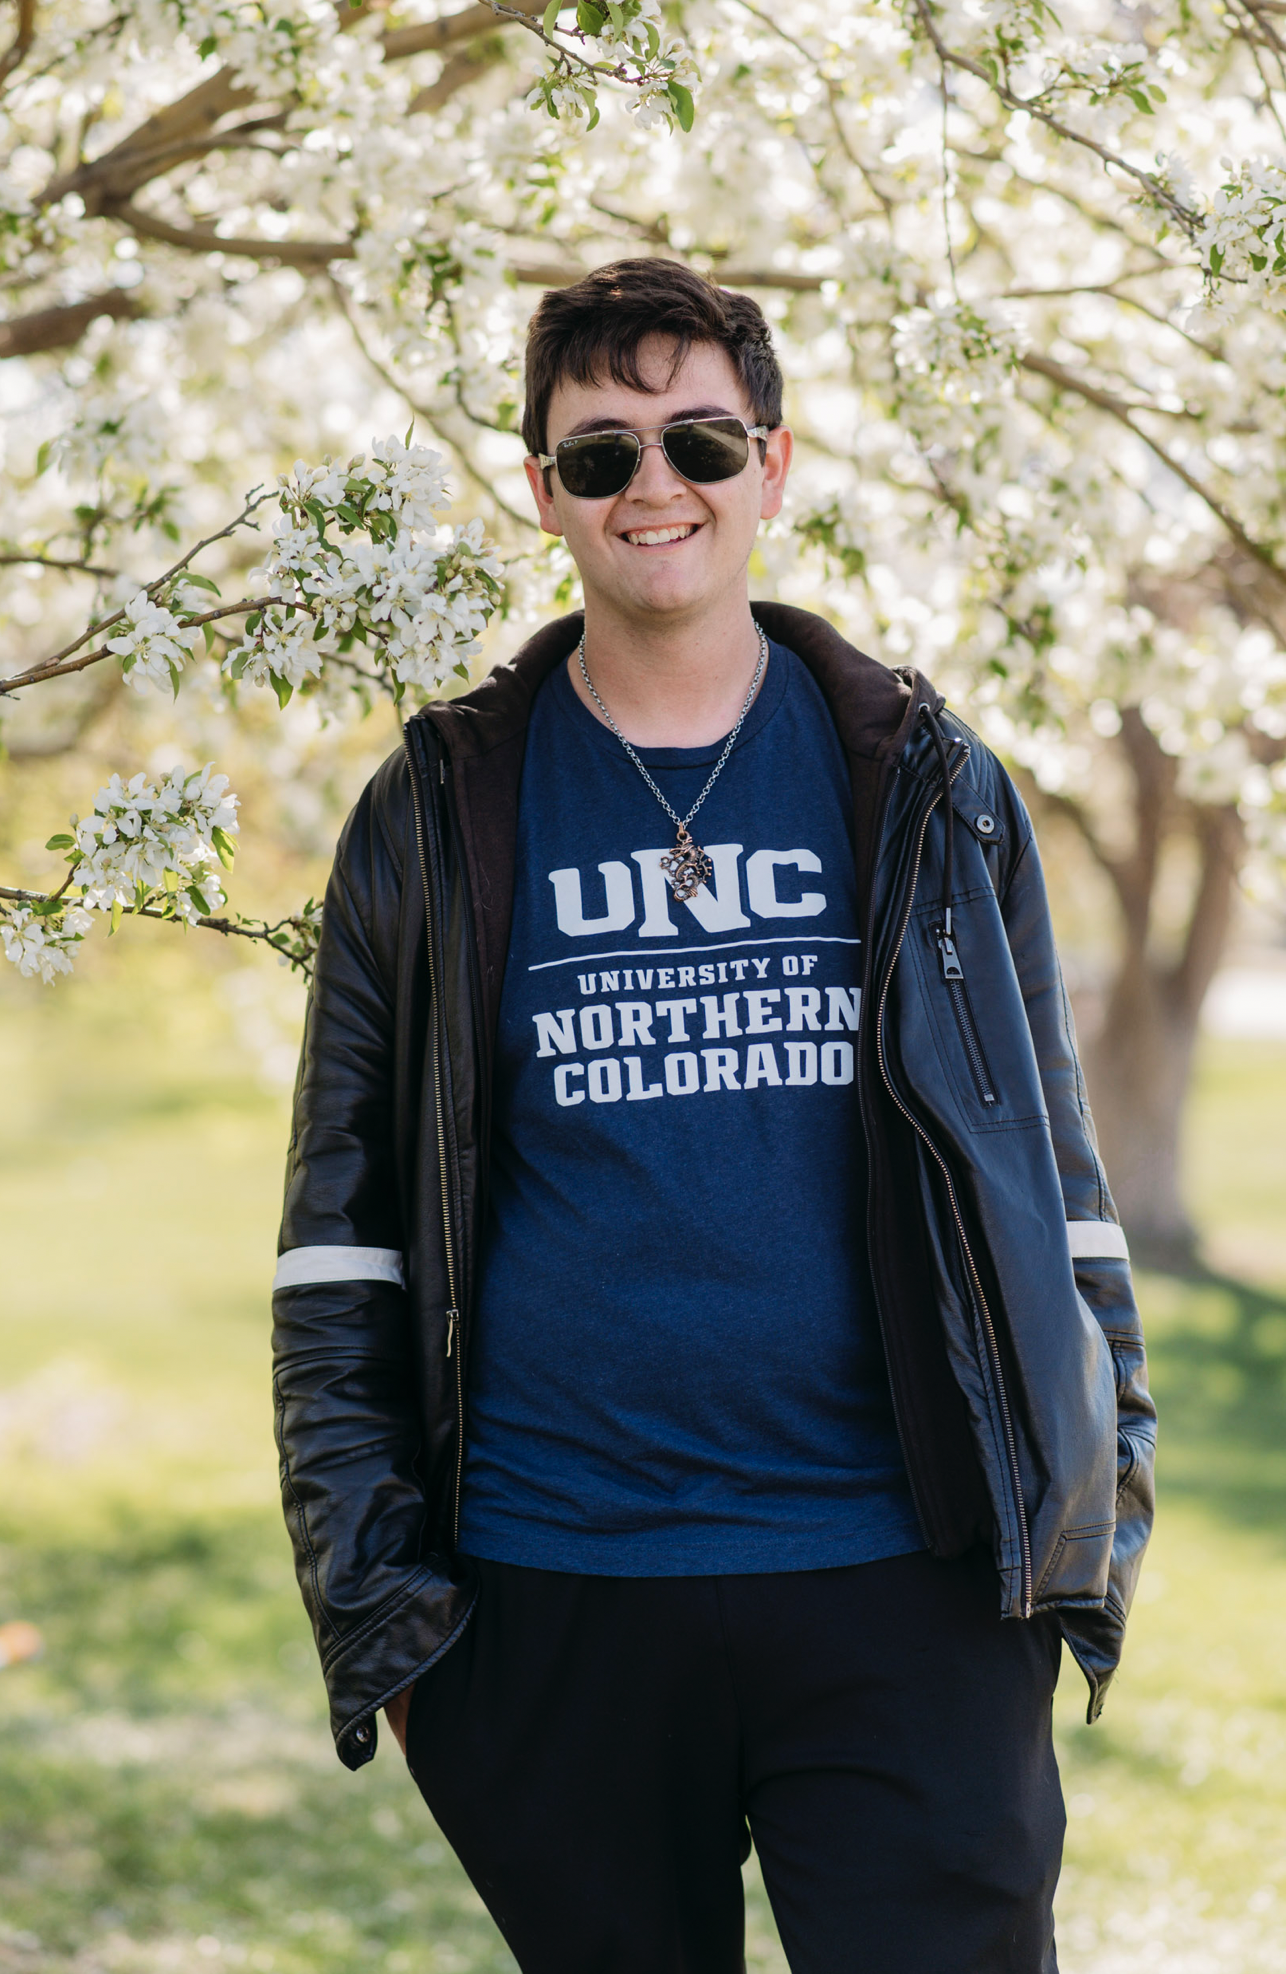 a boy in sunglasses poses for the camera wearing a college shirt